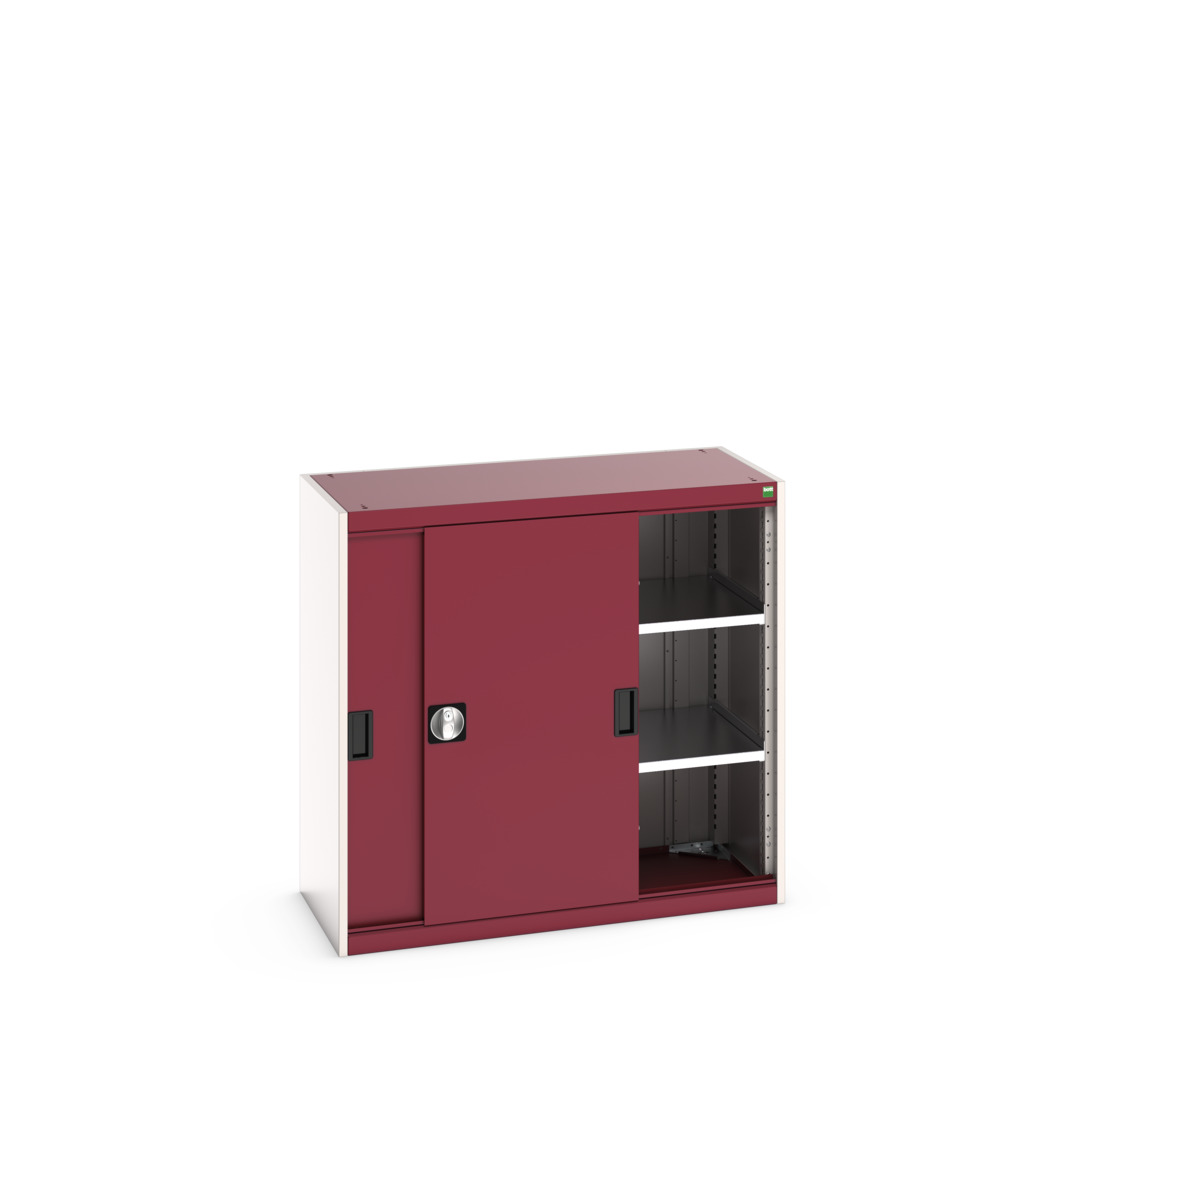 40013068.24V - Armoire Cubio SMS-10510-1.1